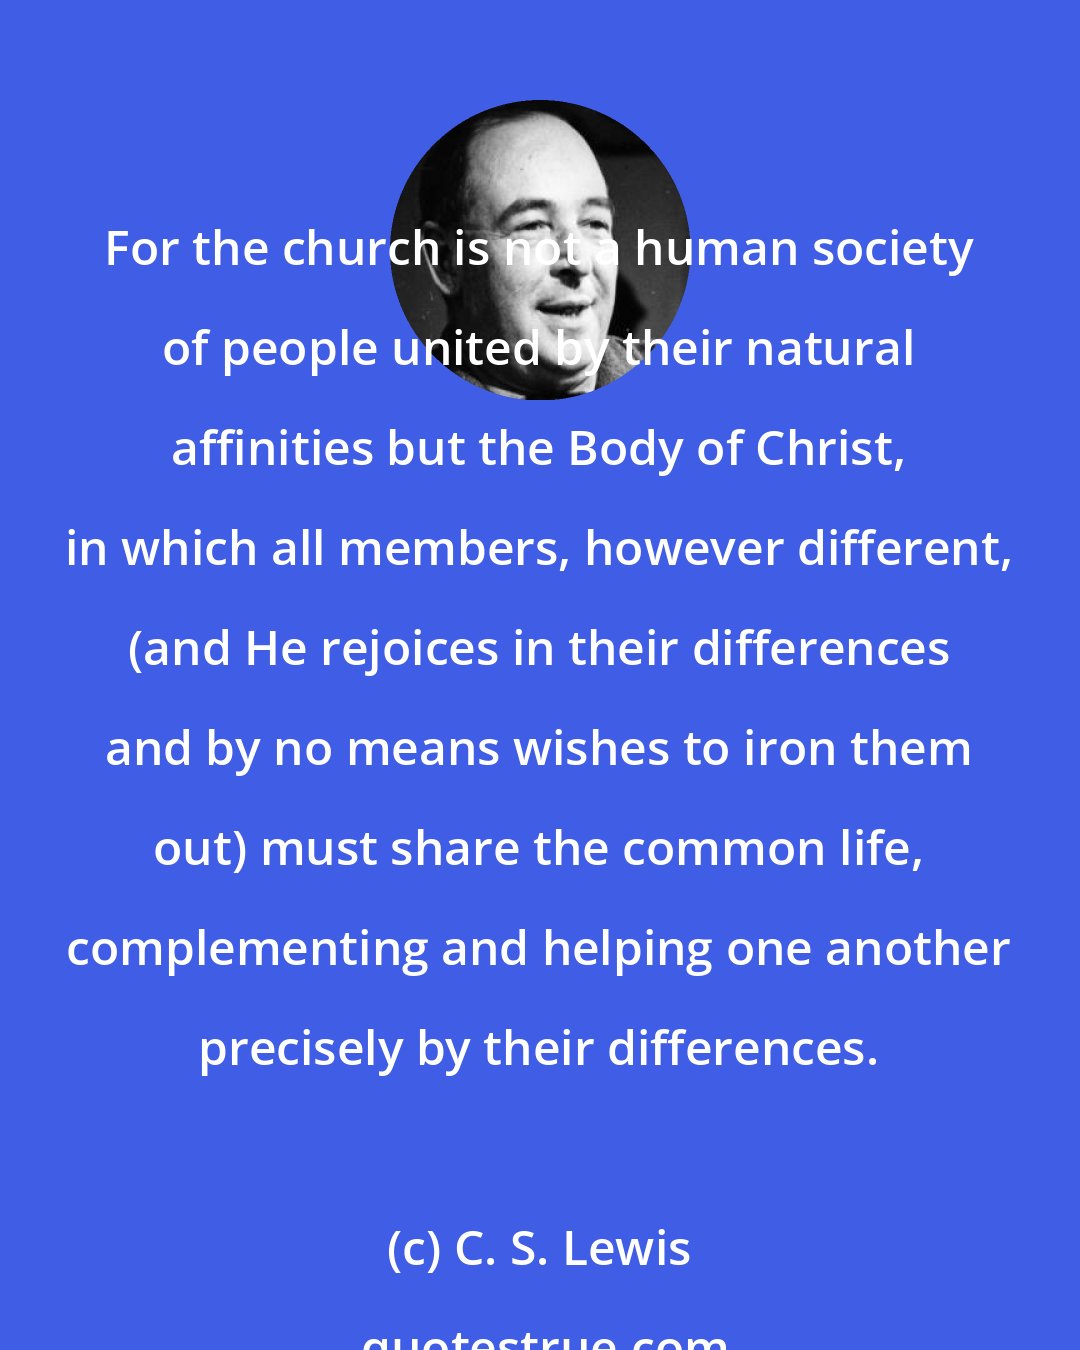 C. S. Lewis: For the church is not a human society of people united by their natural affinities but the Body of Christ, in which all members, however different, (and He rejoices in their differences and by no means wishes to iron them out) must share the common life, complementing and helping one another precisely by their differences.